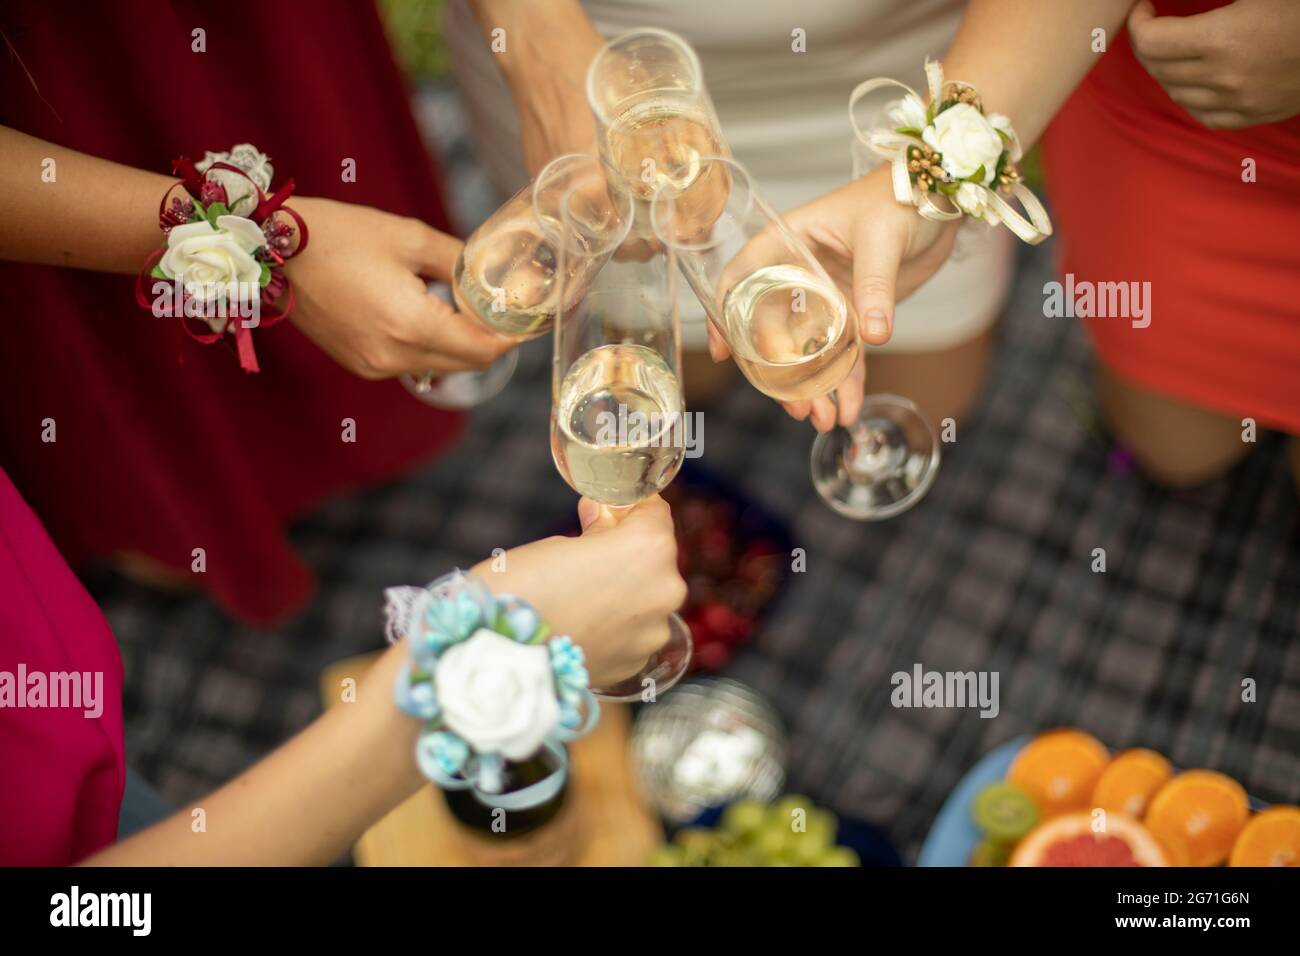 The girls are knocking glasses of wine. Picnic in nature. Stock Photo